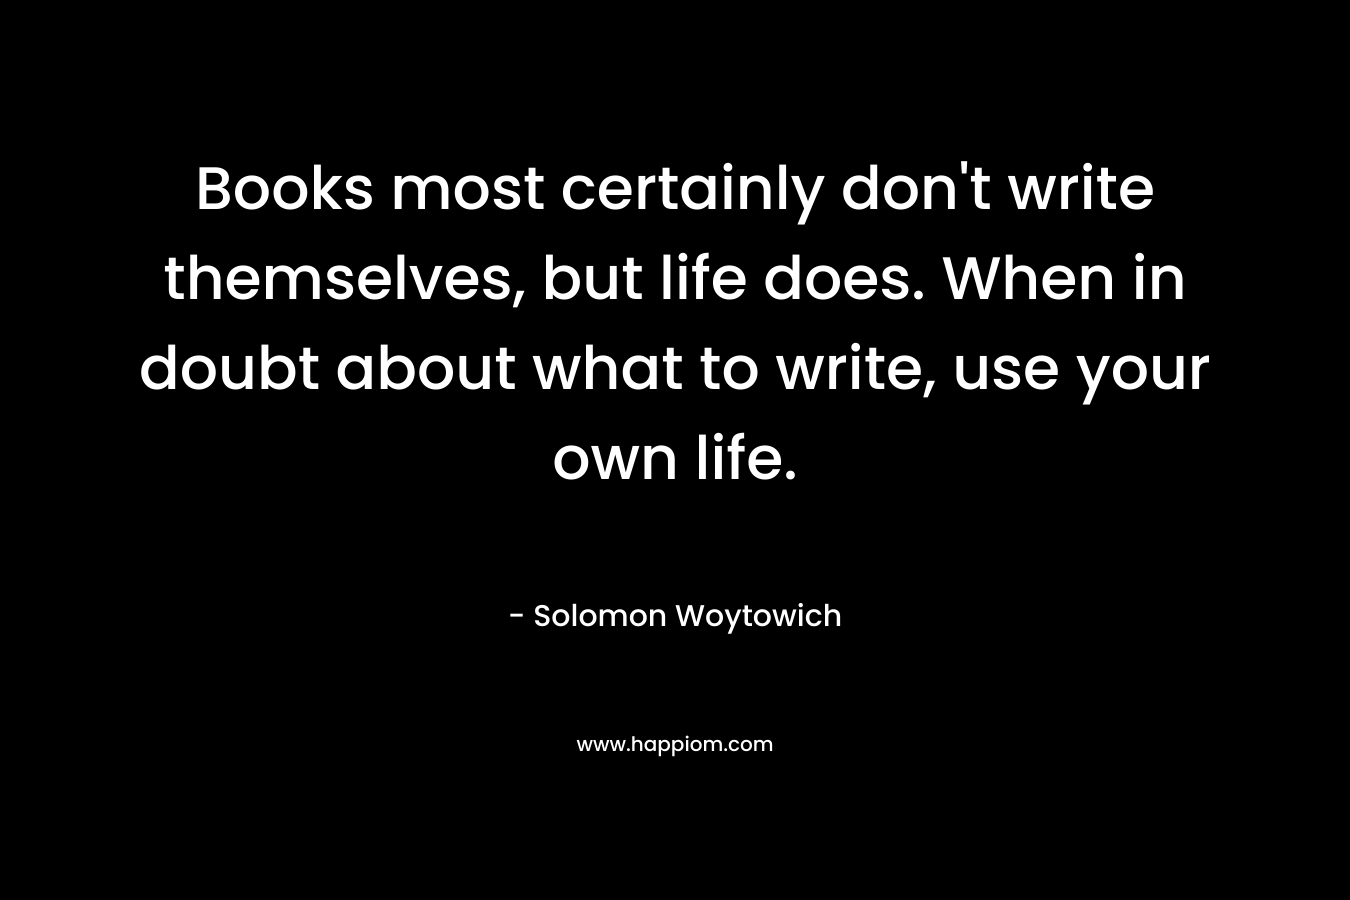 Books most certainly don’t write themselves, but life does. When in doubt about what to write, use your own life. – Solomon Woytowich